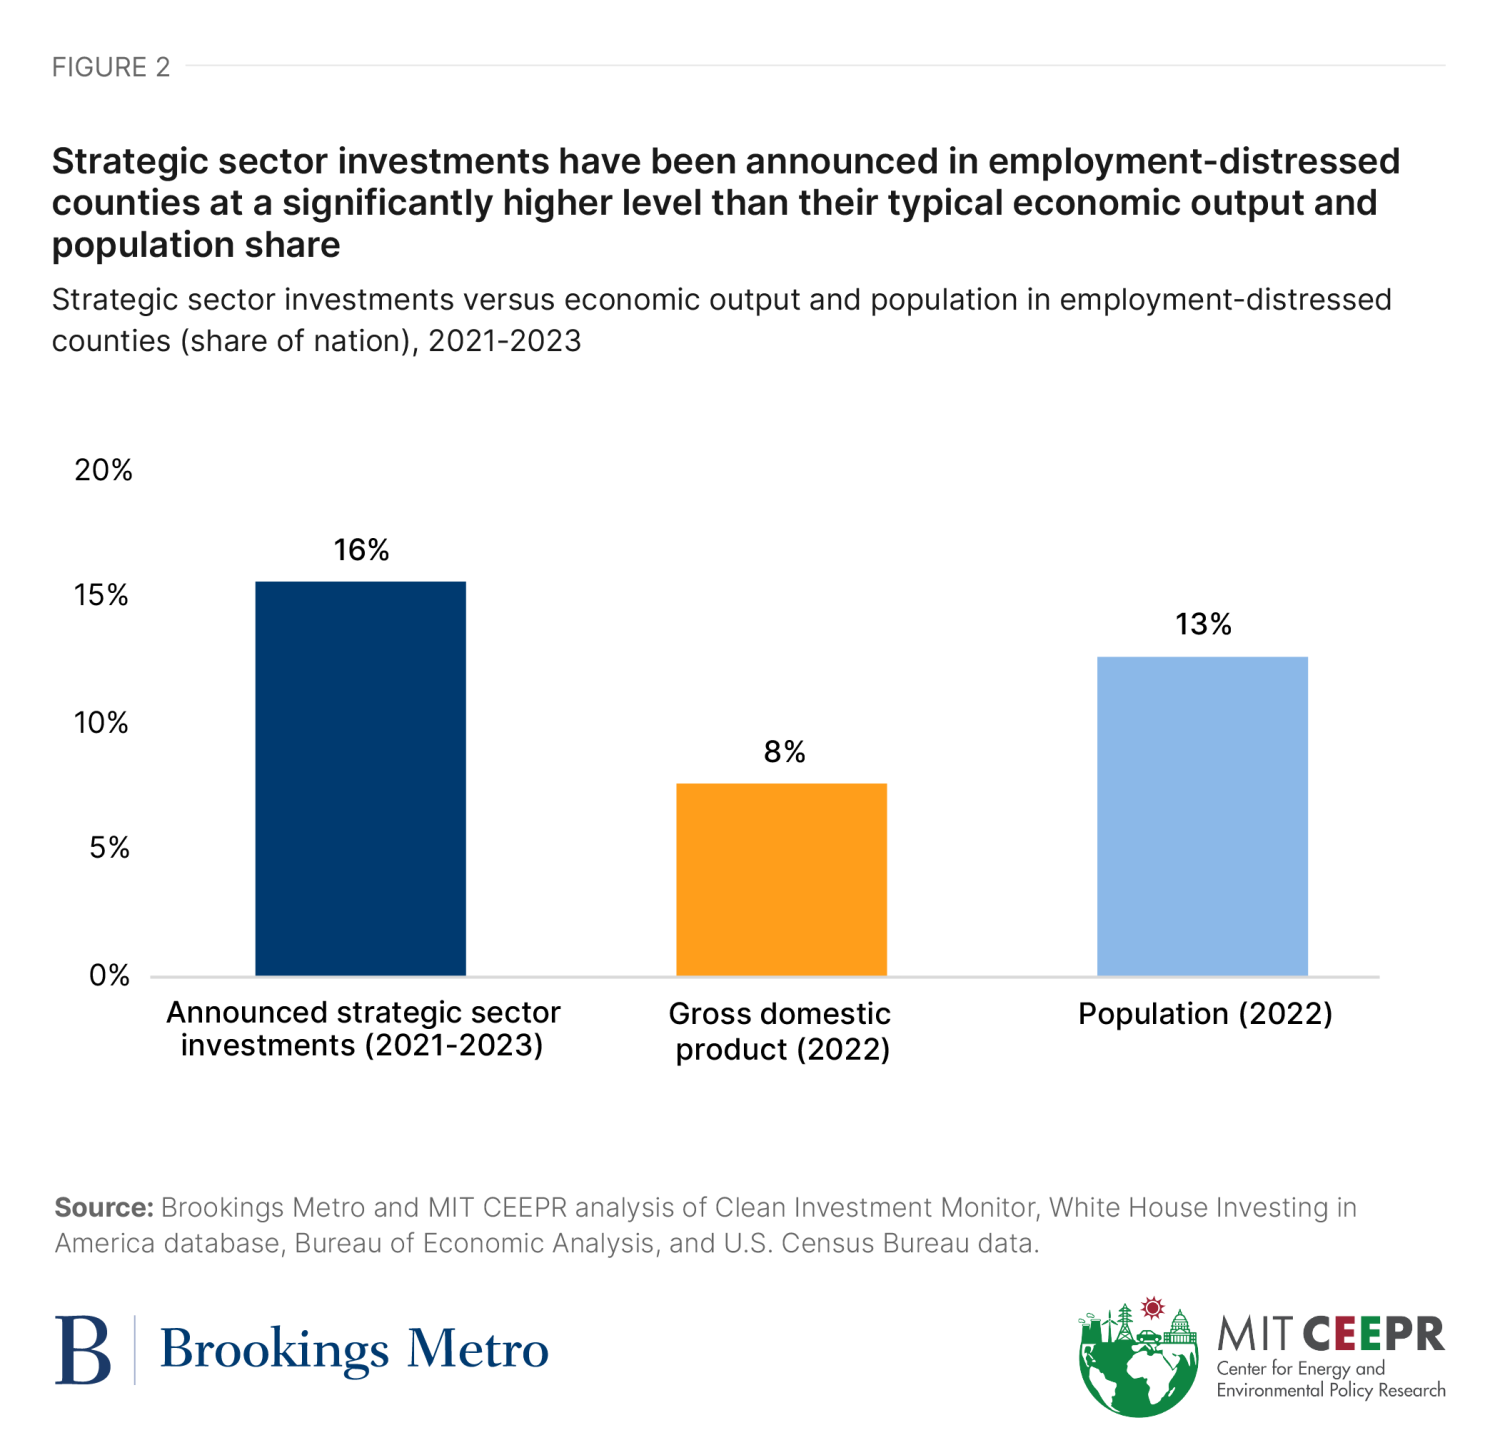 Figure 2: Strategic sector investments have been announced in employment-distressed counties at a significantly higher level than their typical economic output and population share